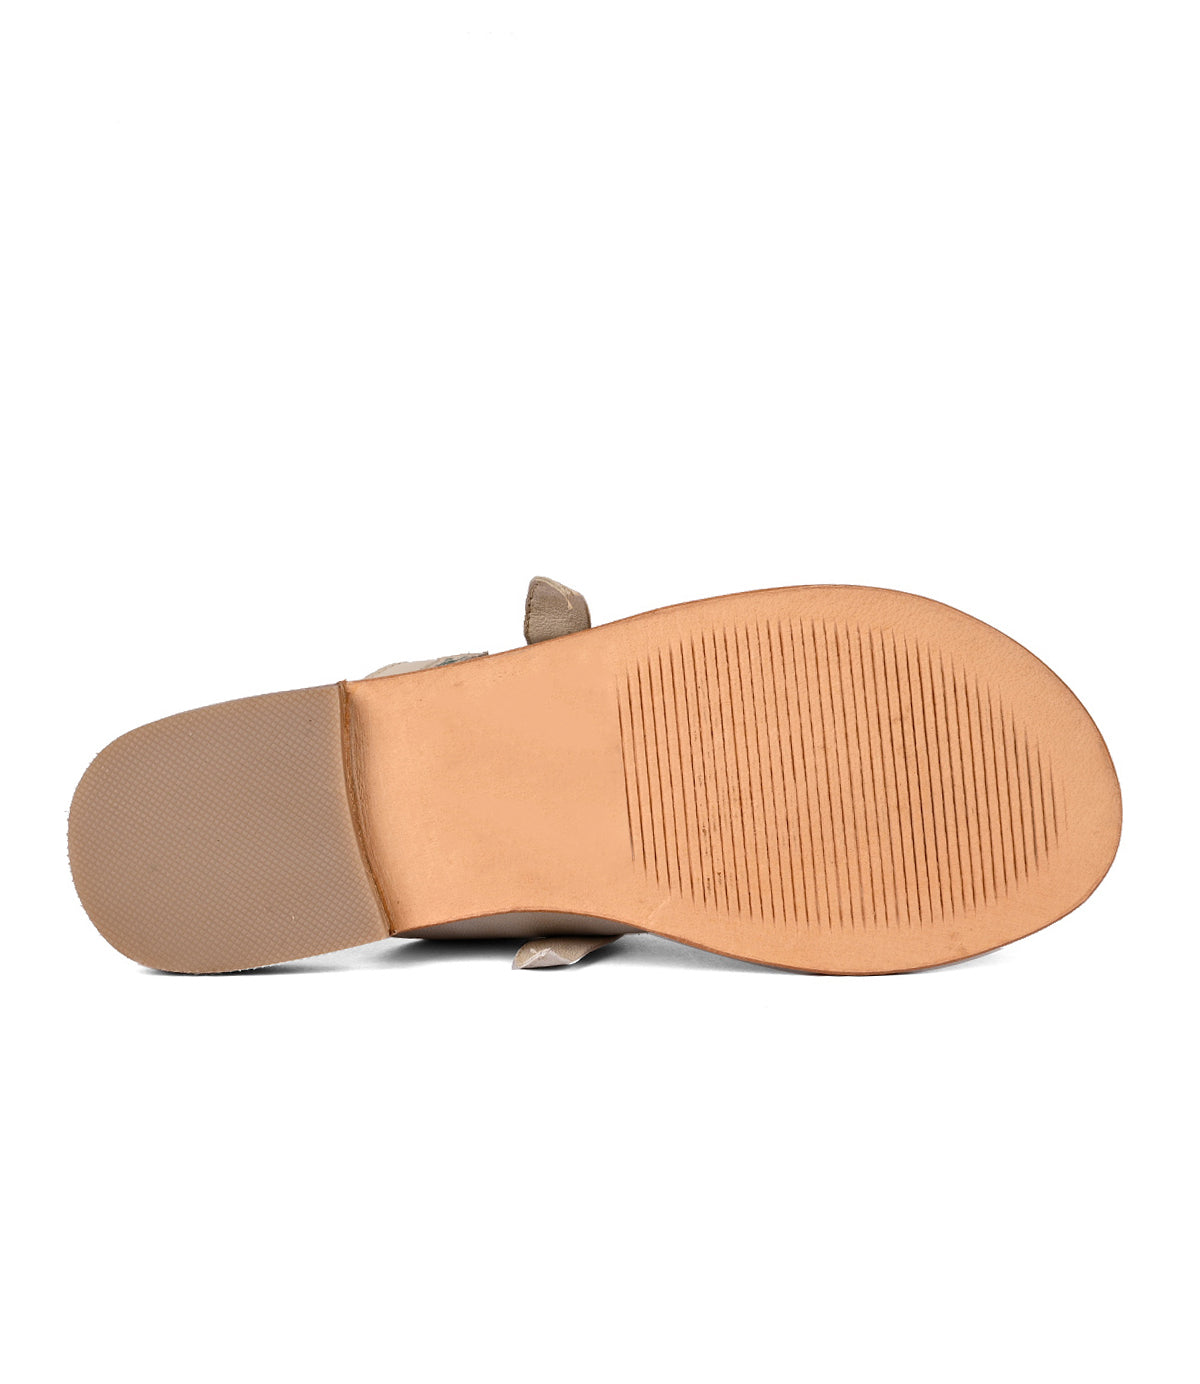 
                  
                    A single Grapevine tan-colored shoe with adjustable leather straps, viewed from the sole side up, by Roan.
                  
                